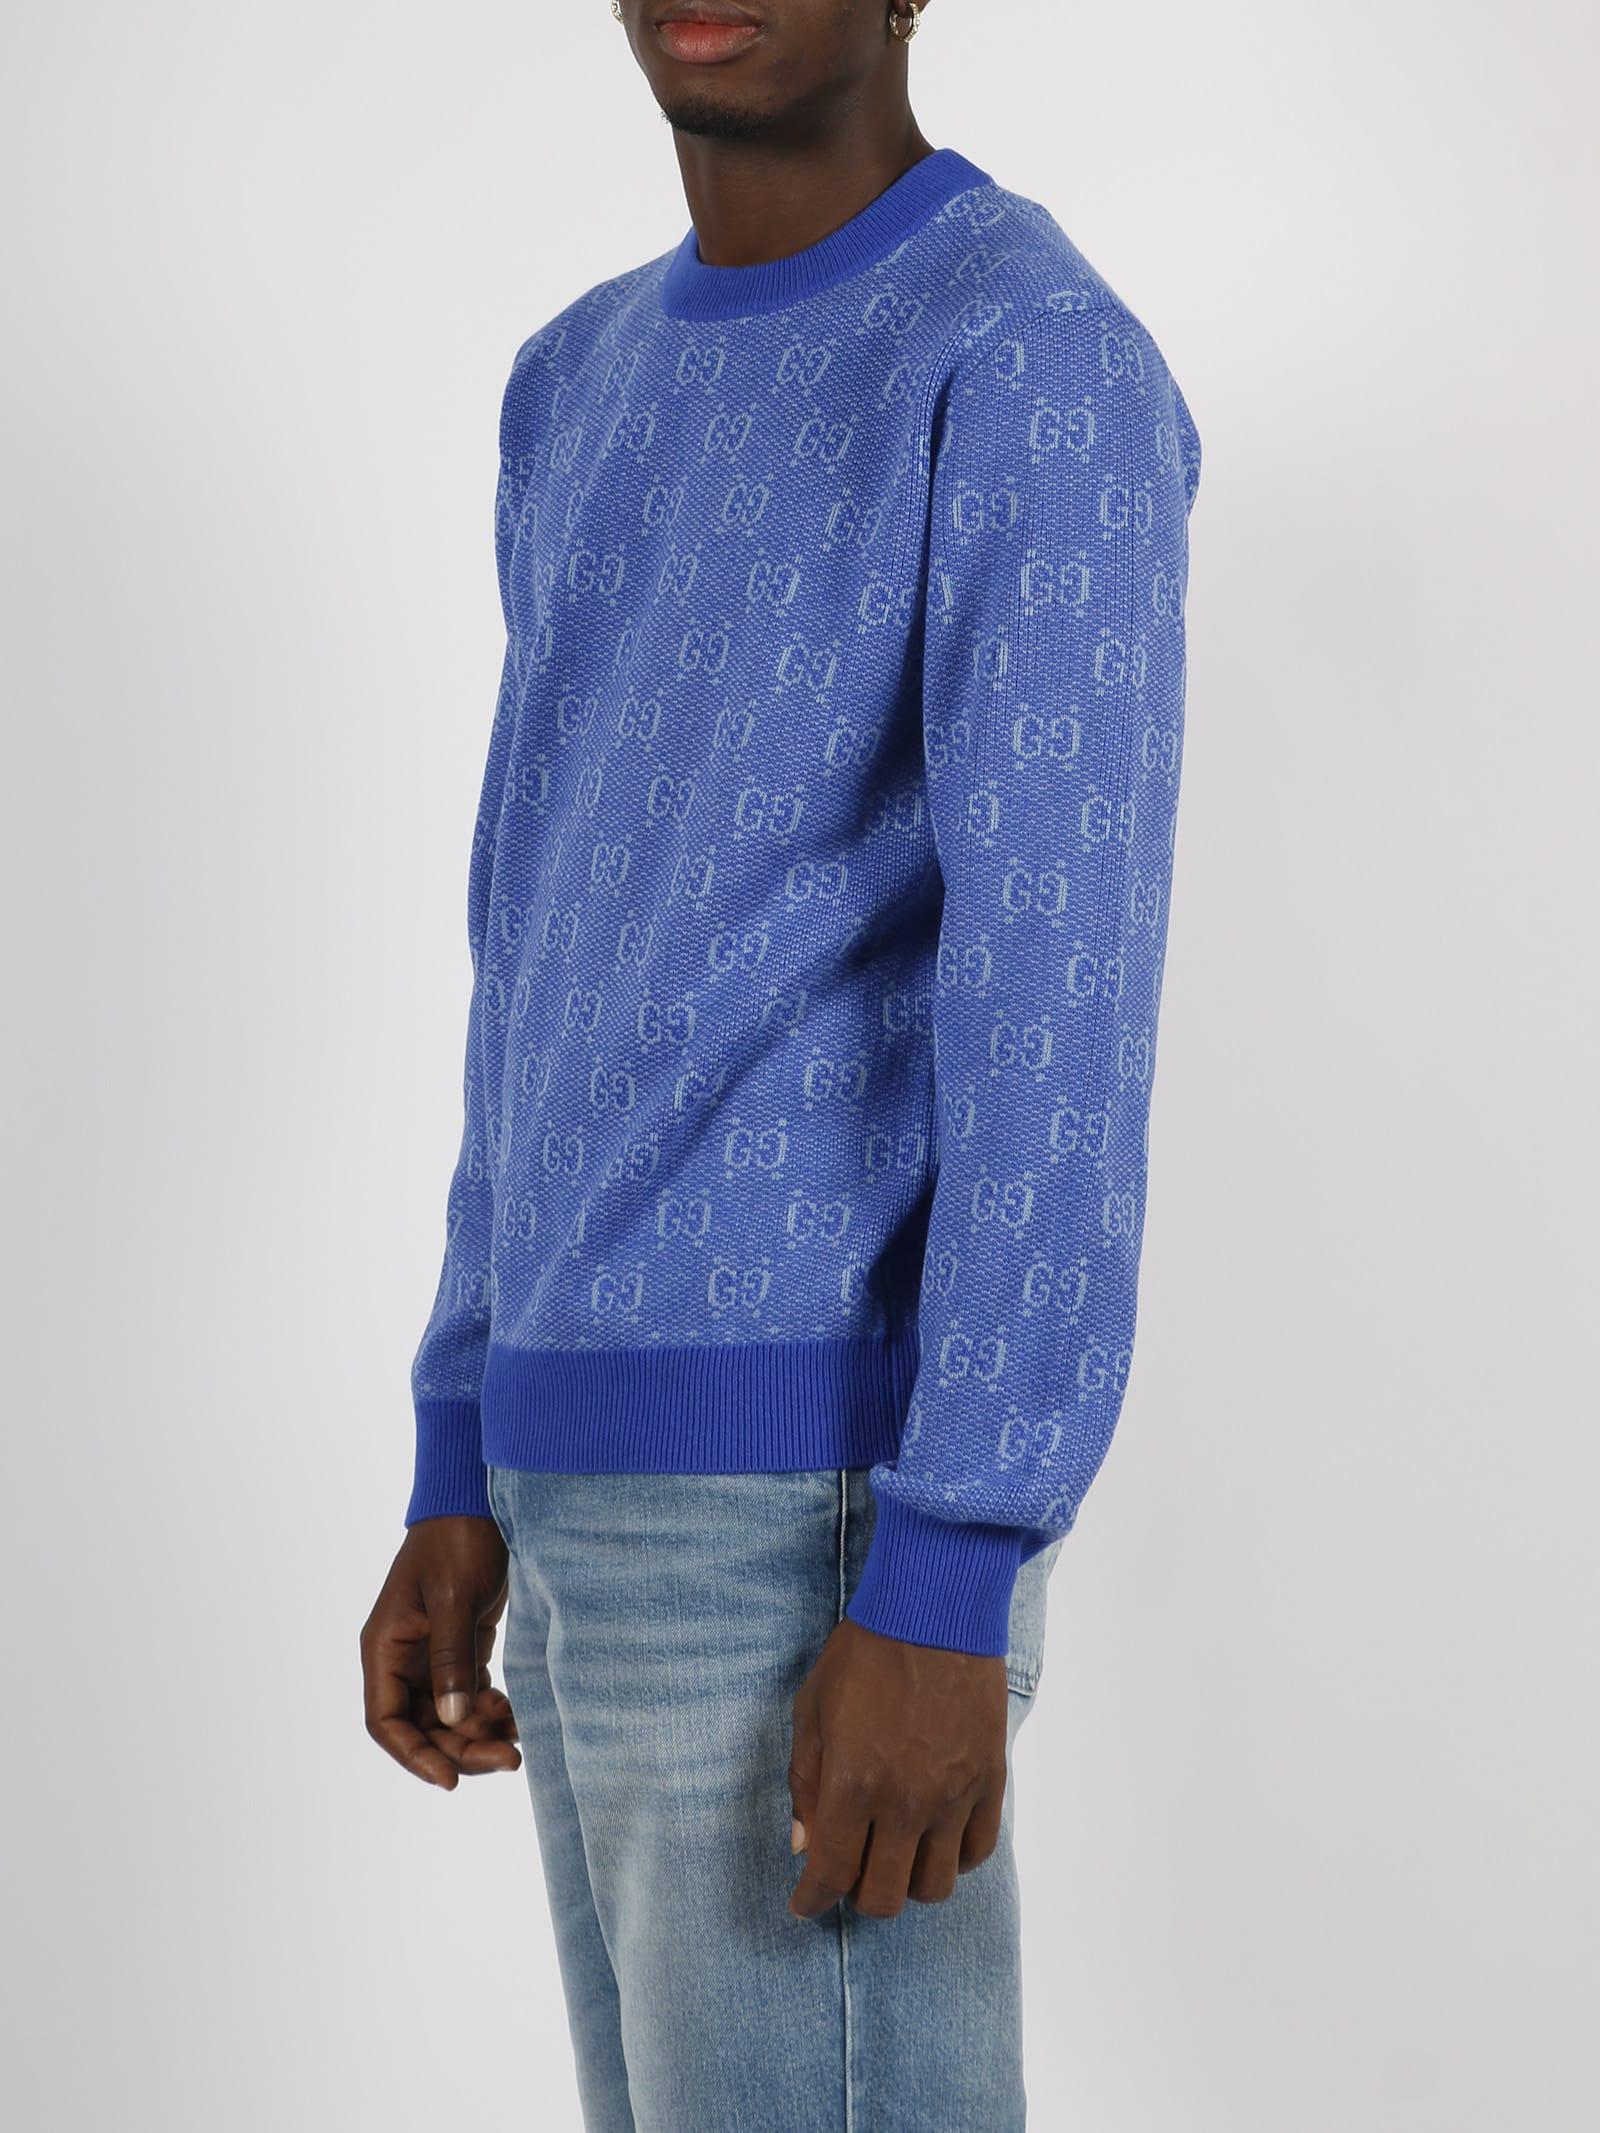 Gucci Gg Wool Jacquard Sweater in Blue for Men